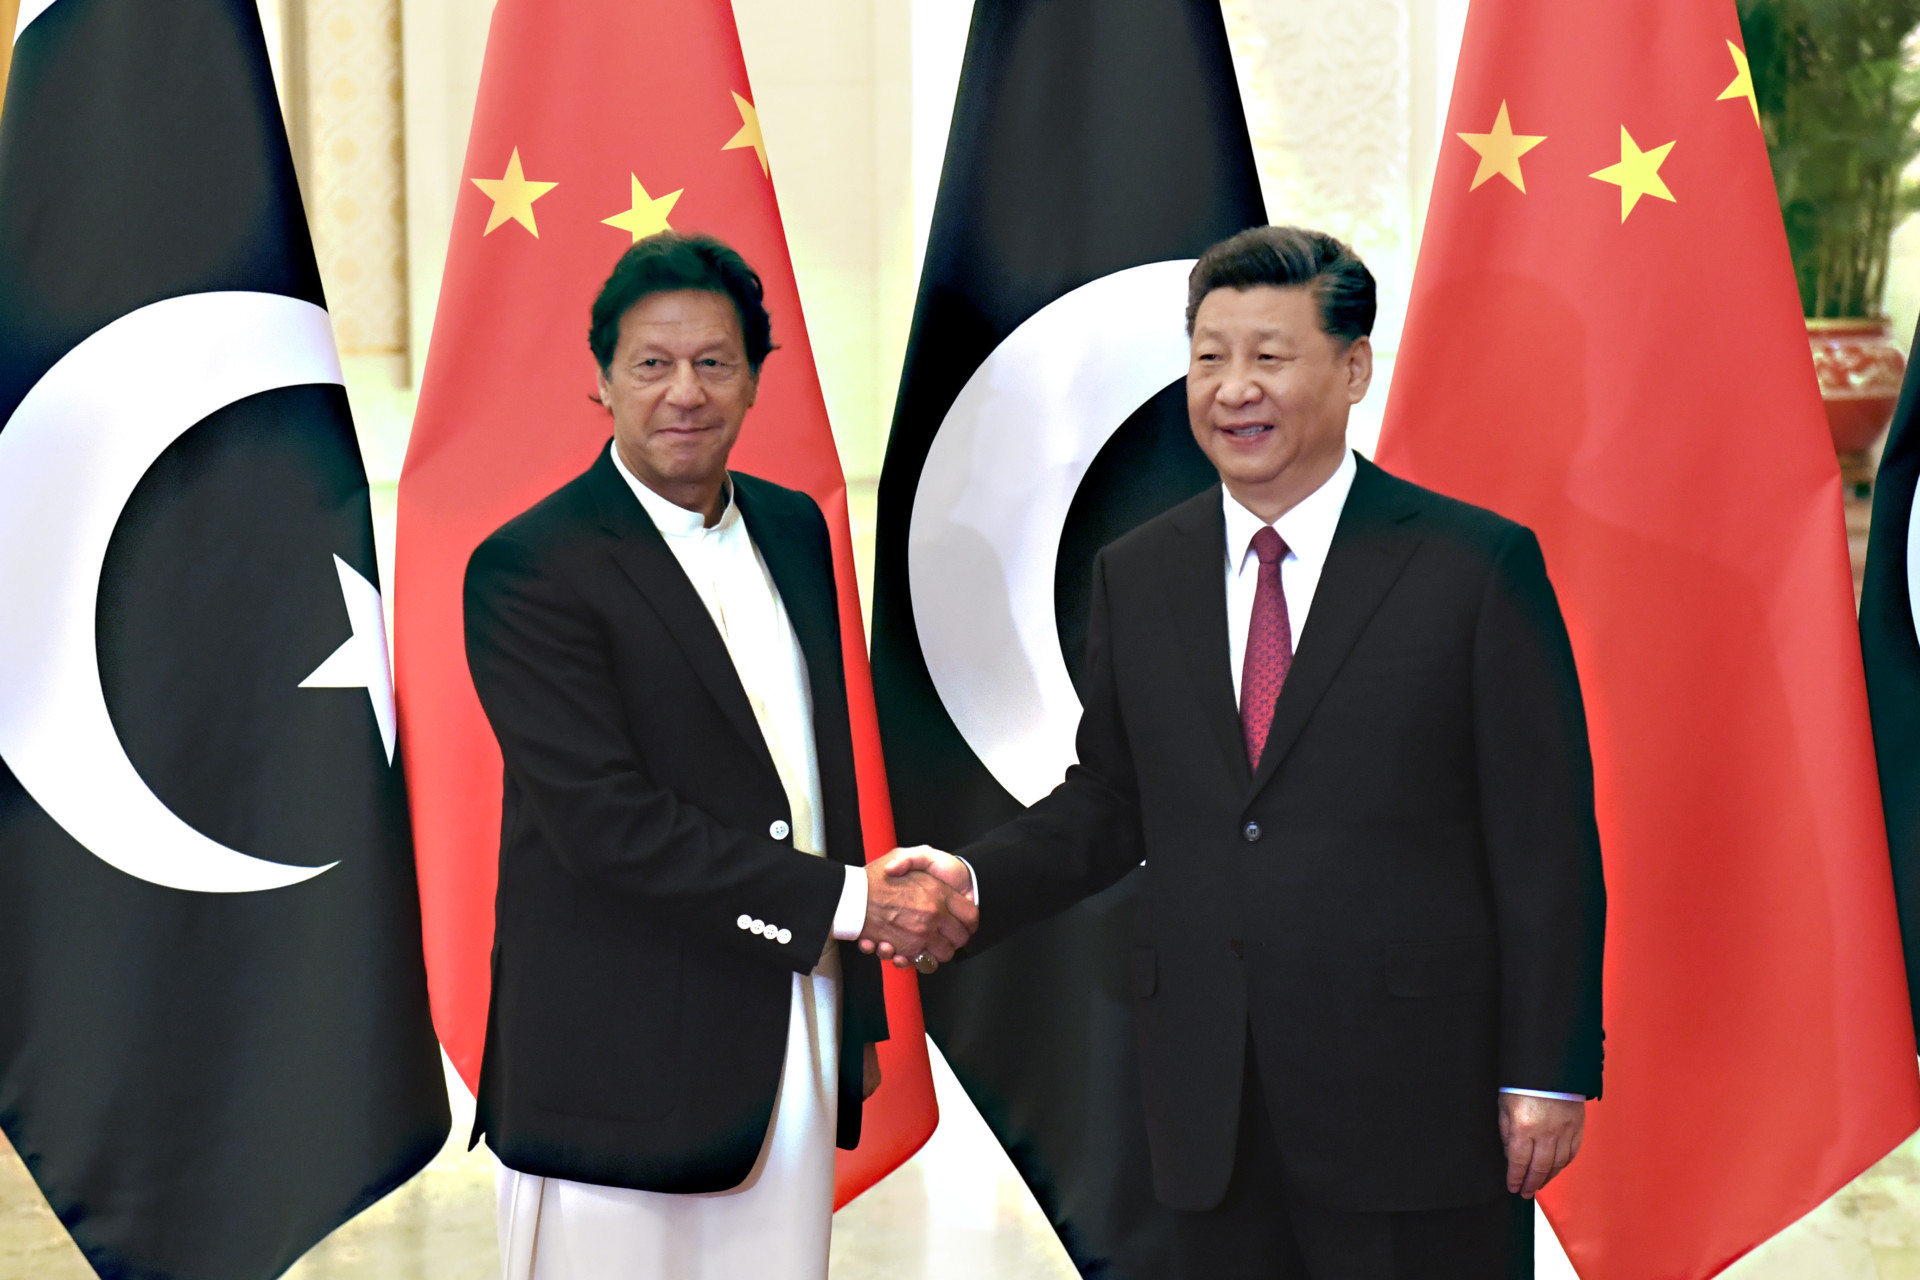 How the U.S. Can Rethink Growing China-Pakistan Ties